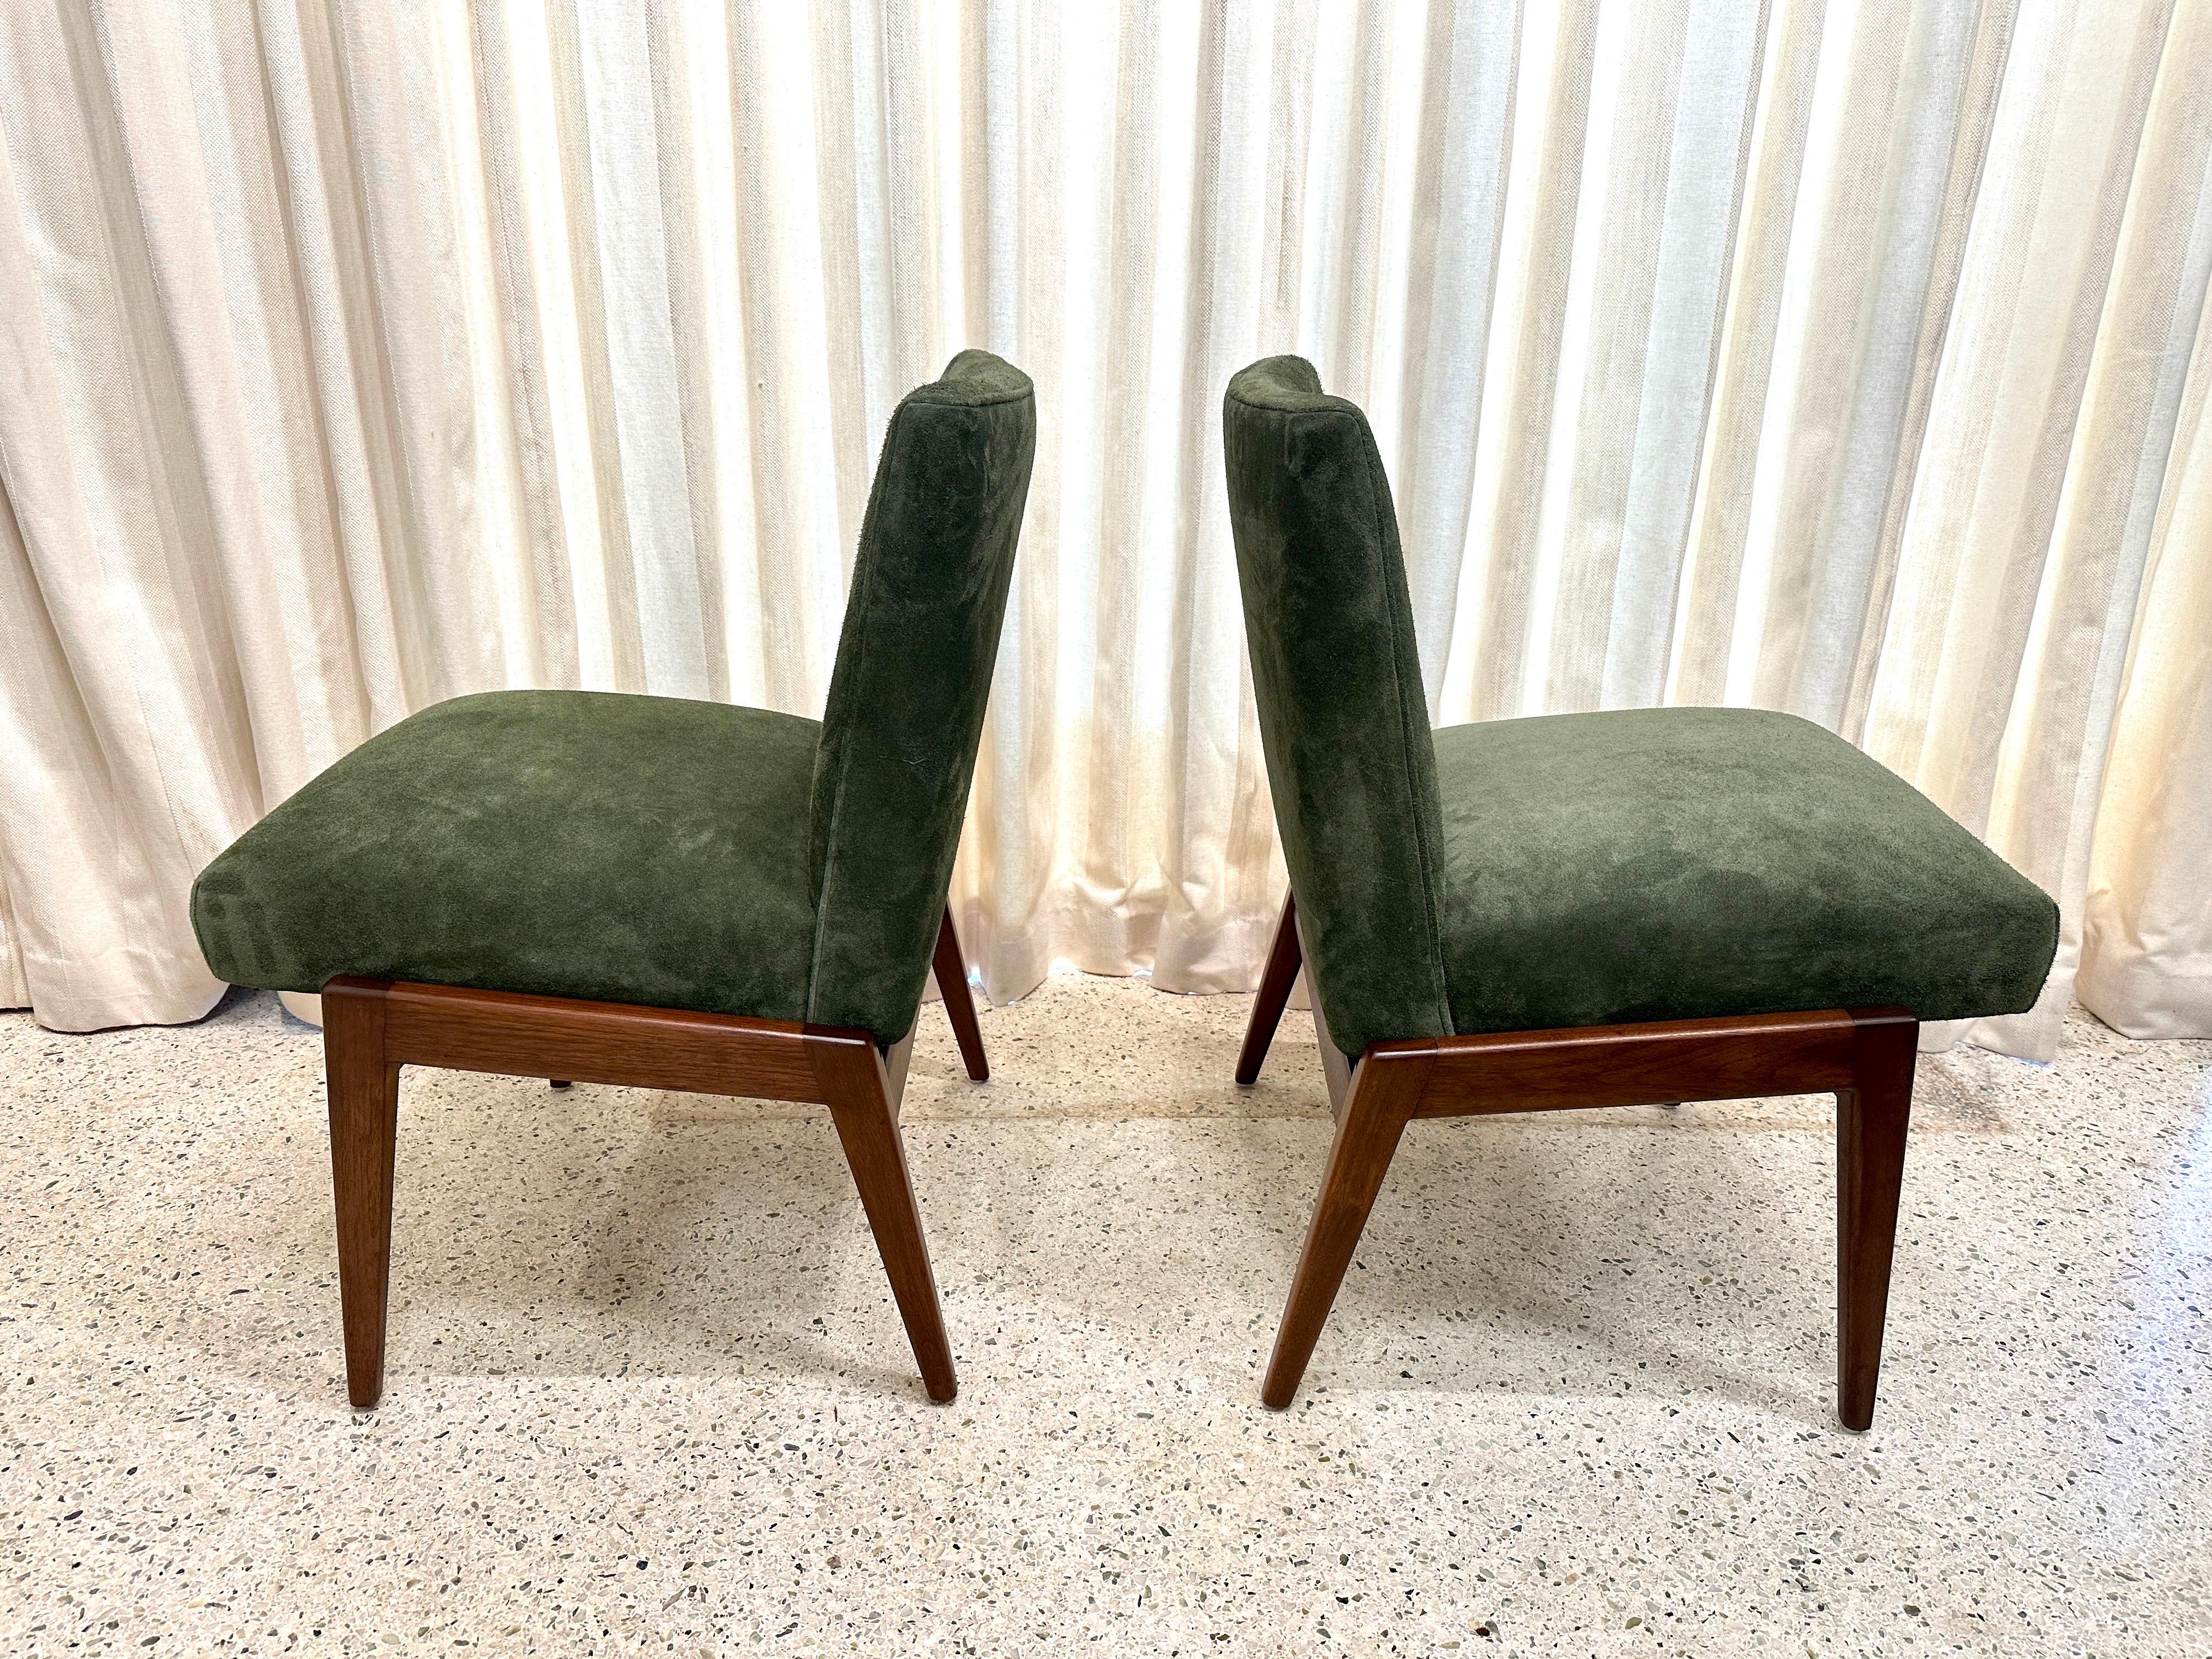 Danish Original Vintage Jens Risom Chairs in Green Suede w/ Label, PAIR For Sale